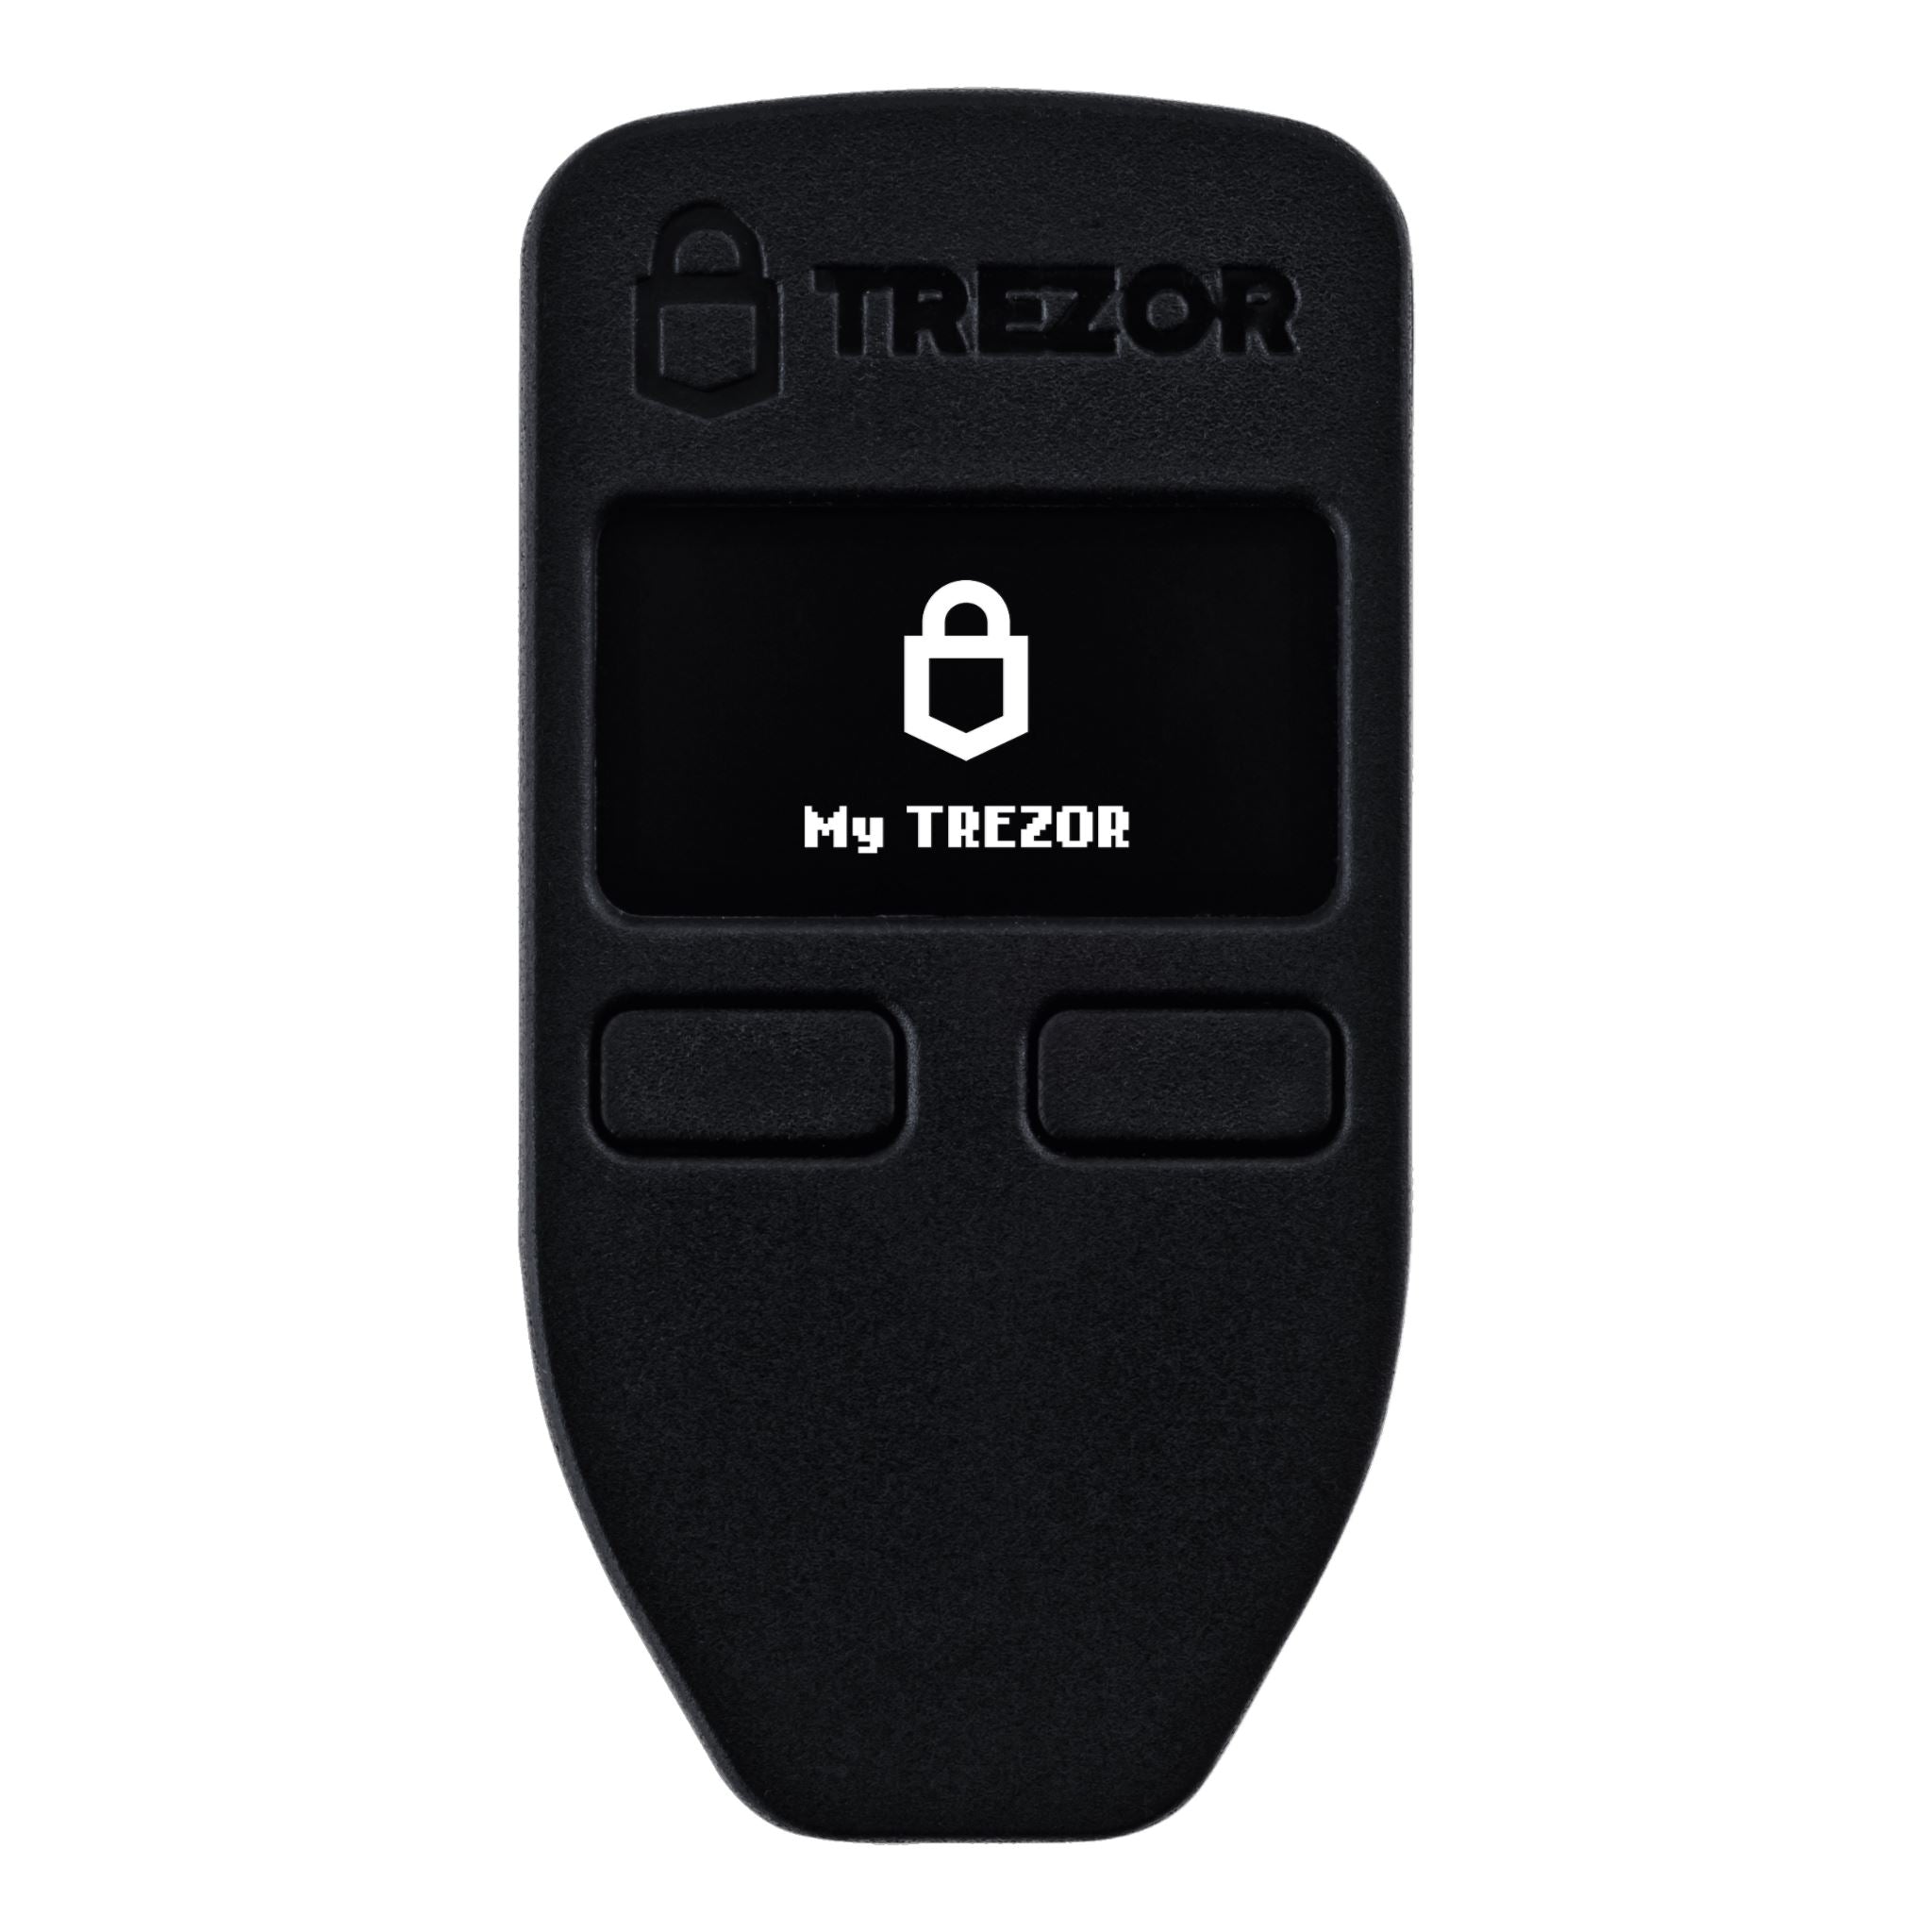 Yoroi and Trezor problems - Community Technical Support - Cardano Forum